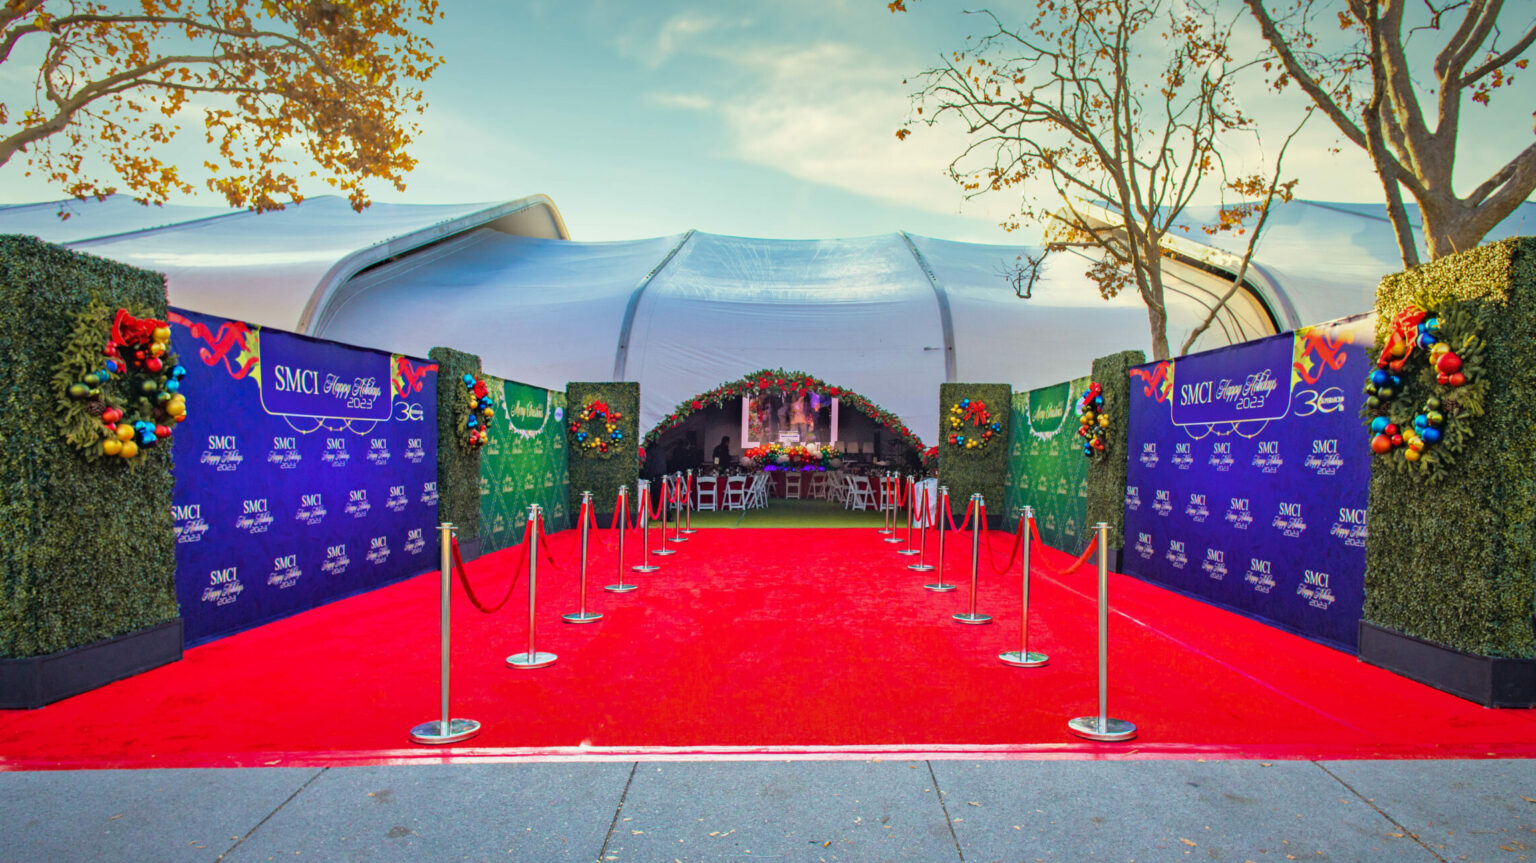 A vibrant picture of the Supermicro Entrance with red carpet, backdrops, hedges, and holiday wreathes